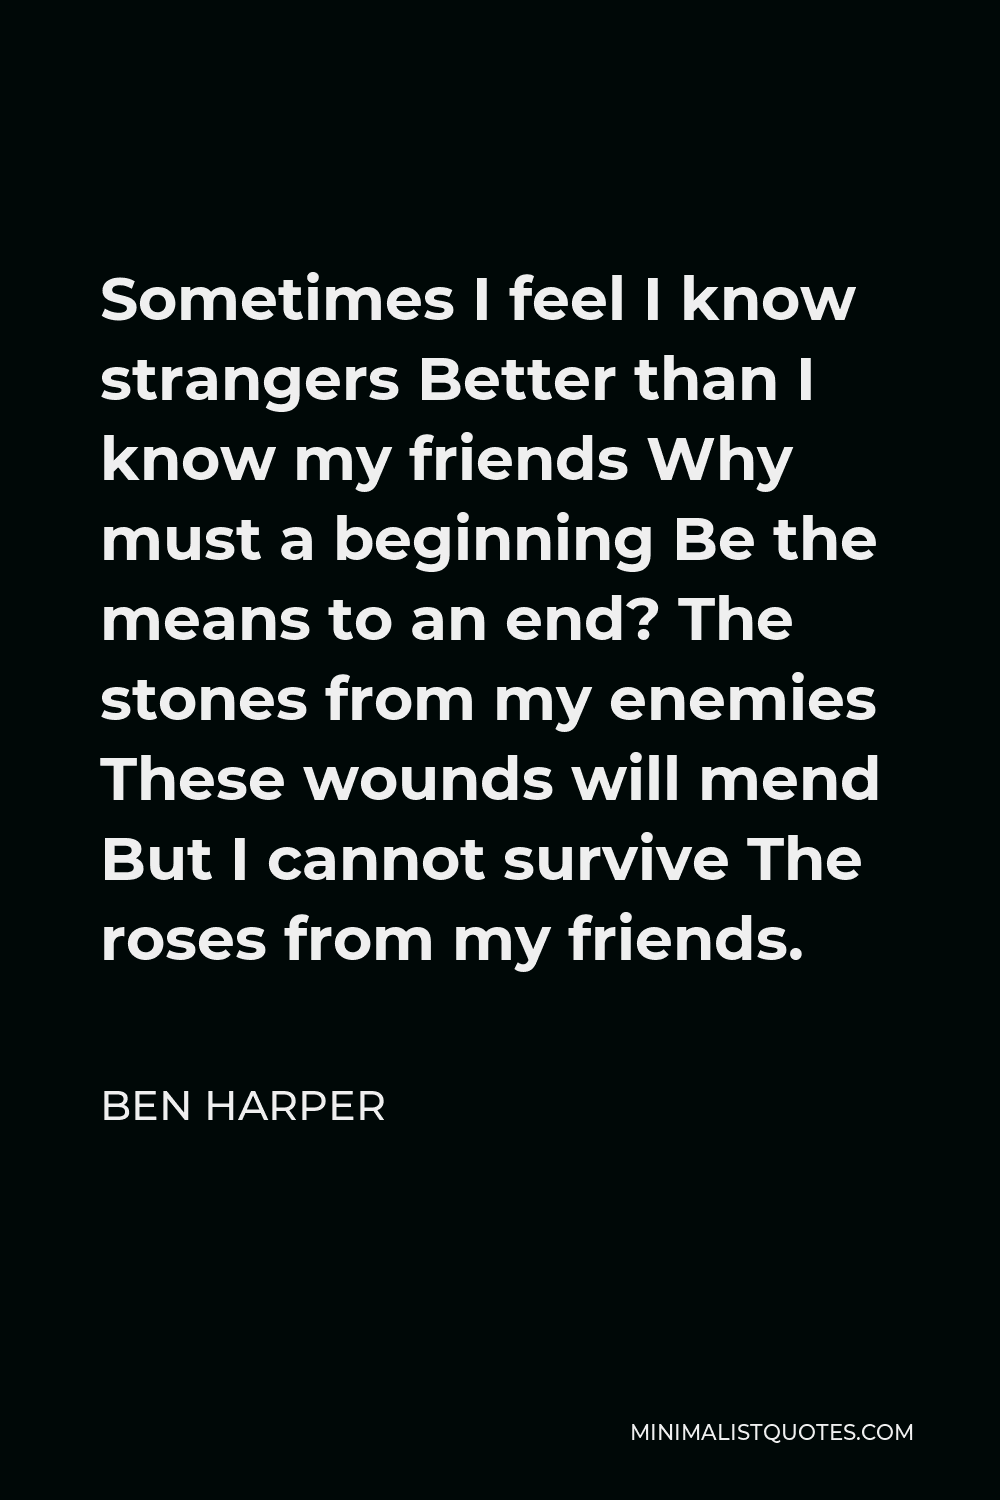 Ben Harper Quote - Sometimes I feel I know strangers Better than I know my friends Why must a beginning Be the means to an end? The stones from my enemies These wounds will mend But I cannot survive The roses from my friends.